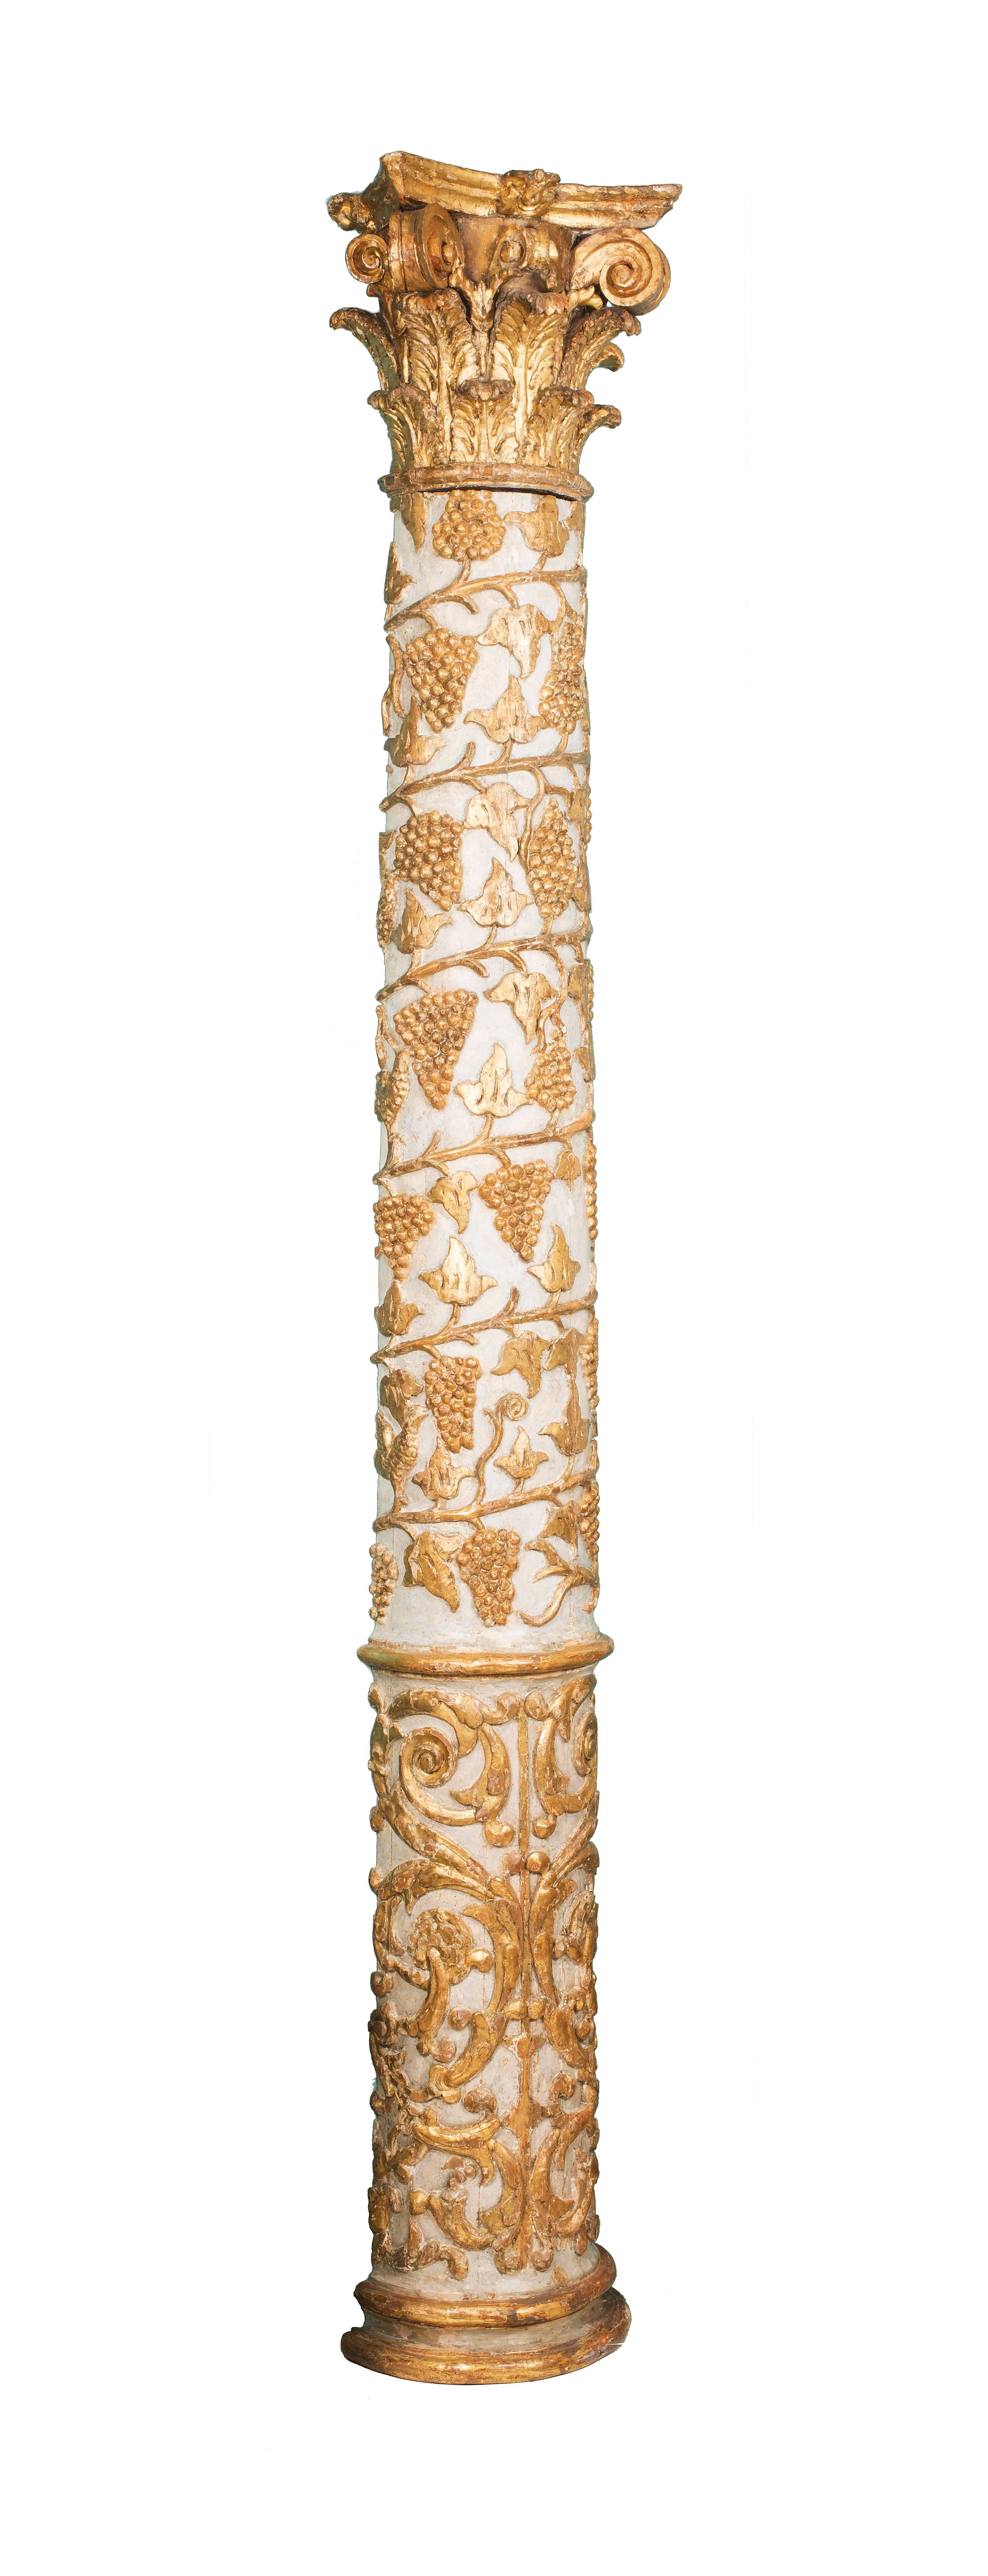 For sale on 1stdibs a pair of 18th century Italian carved, gilded and cream painted wood half columns. Decorated with foliage, grapes and birds these Baroque pieces are an important pair to side some piece or door in a house. The lower part